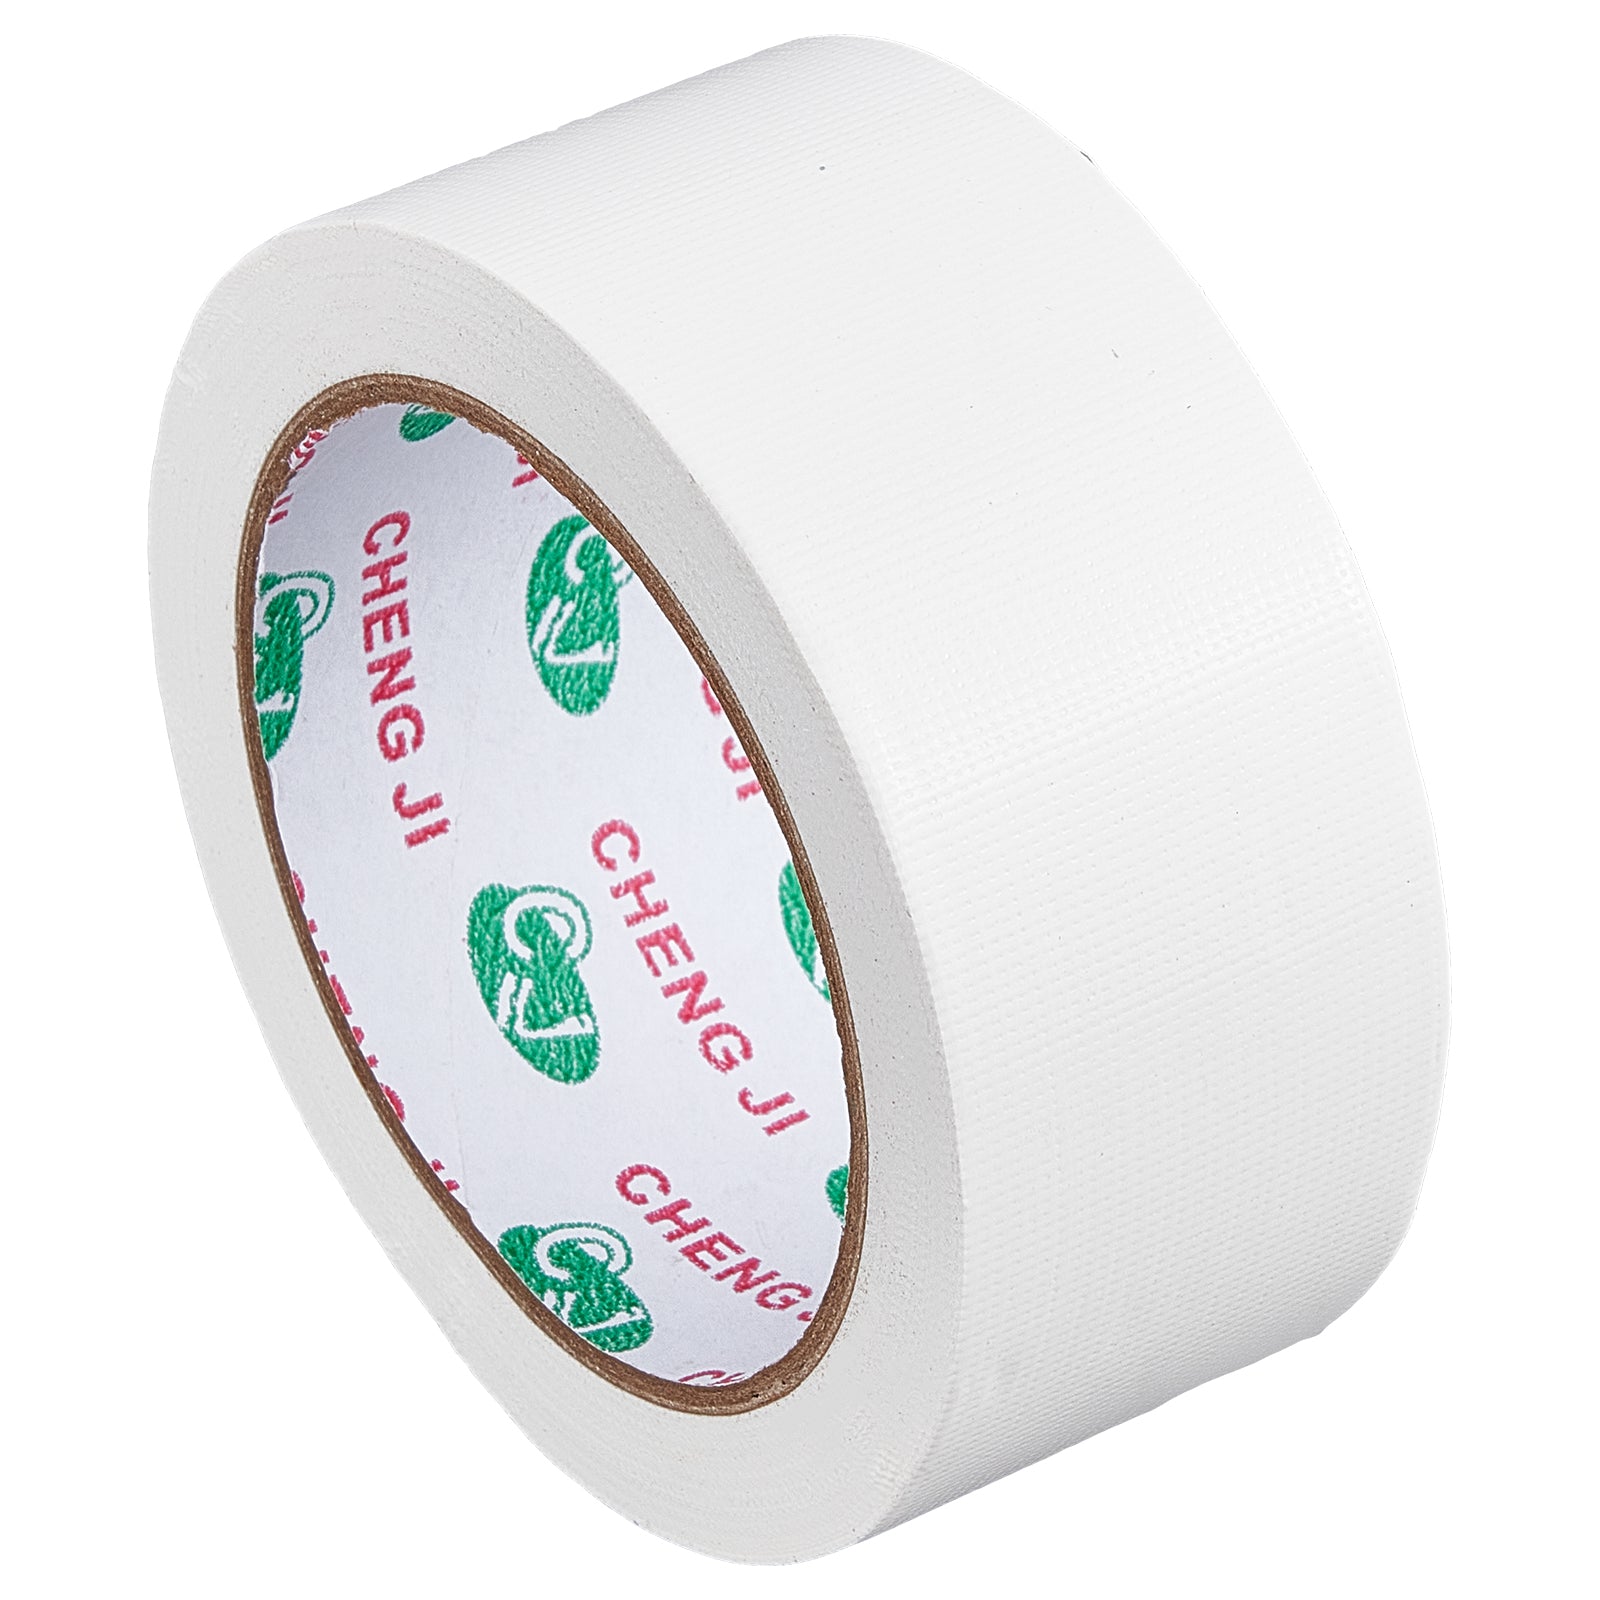 Globleland PE & Gauze Adhesive Tapes for Fixing Carpet, Bookbinding Repair Cloth Tape, White, 4.5cm, about 20m/roll